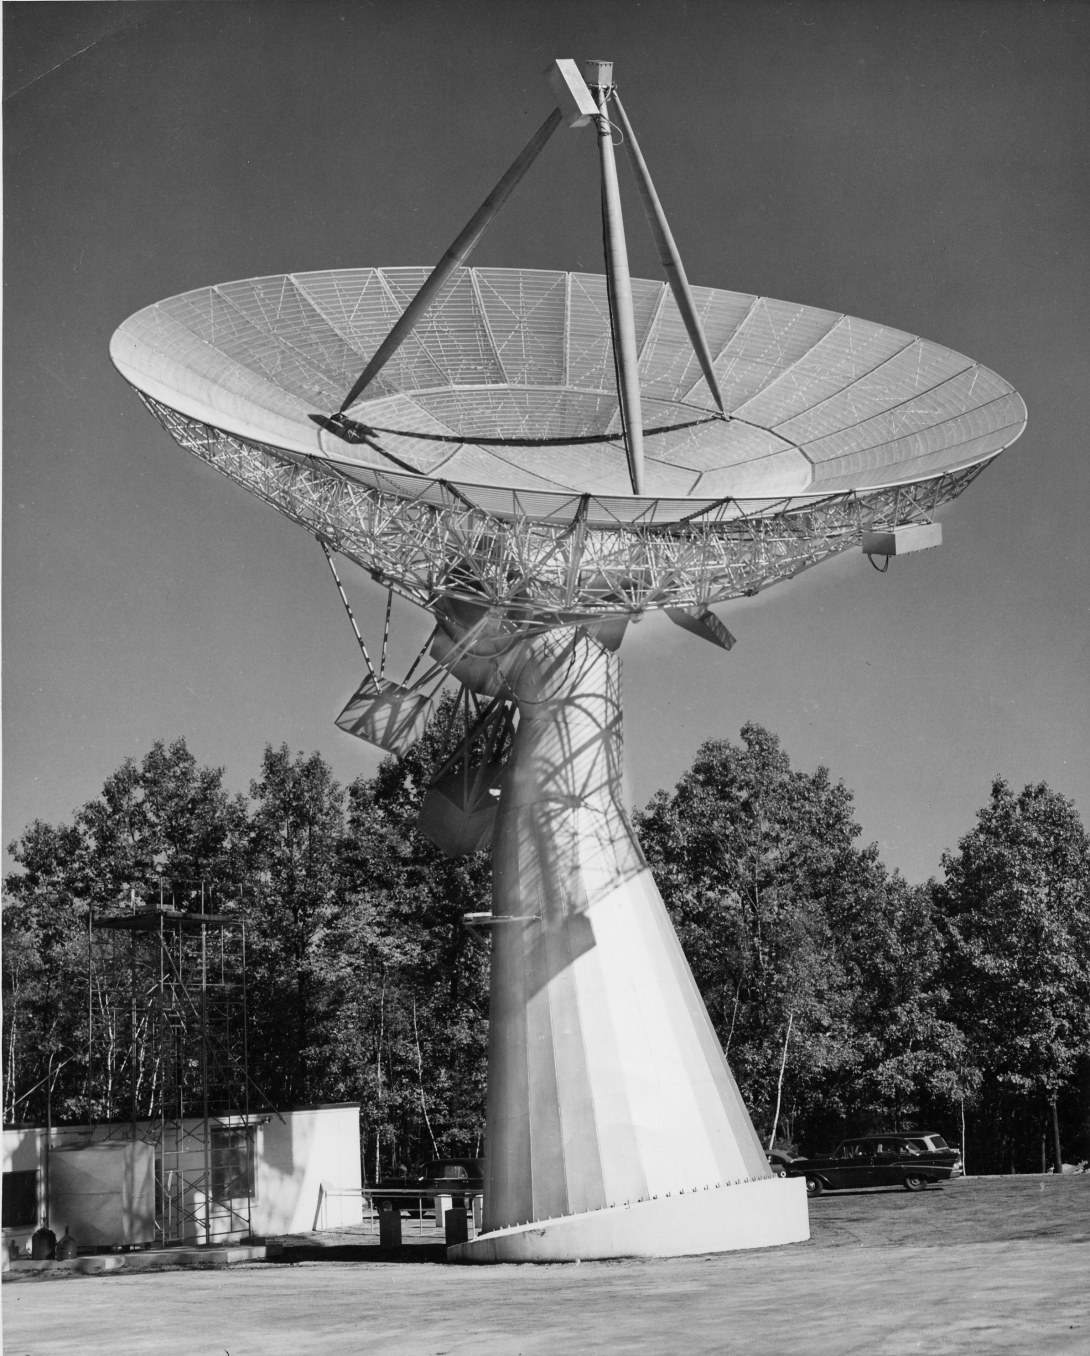 A large dish antenna pointed skyward. The dish is roughly twice the size of a trailer next to its base, and stands above the treetops.